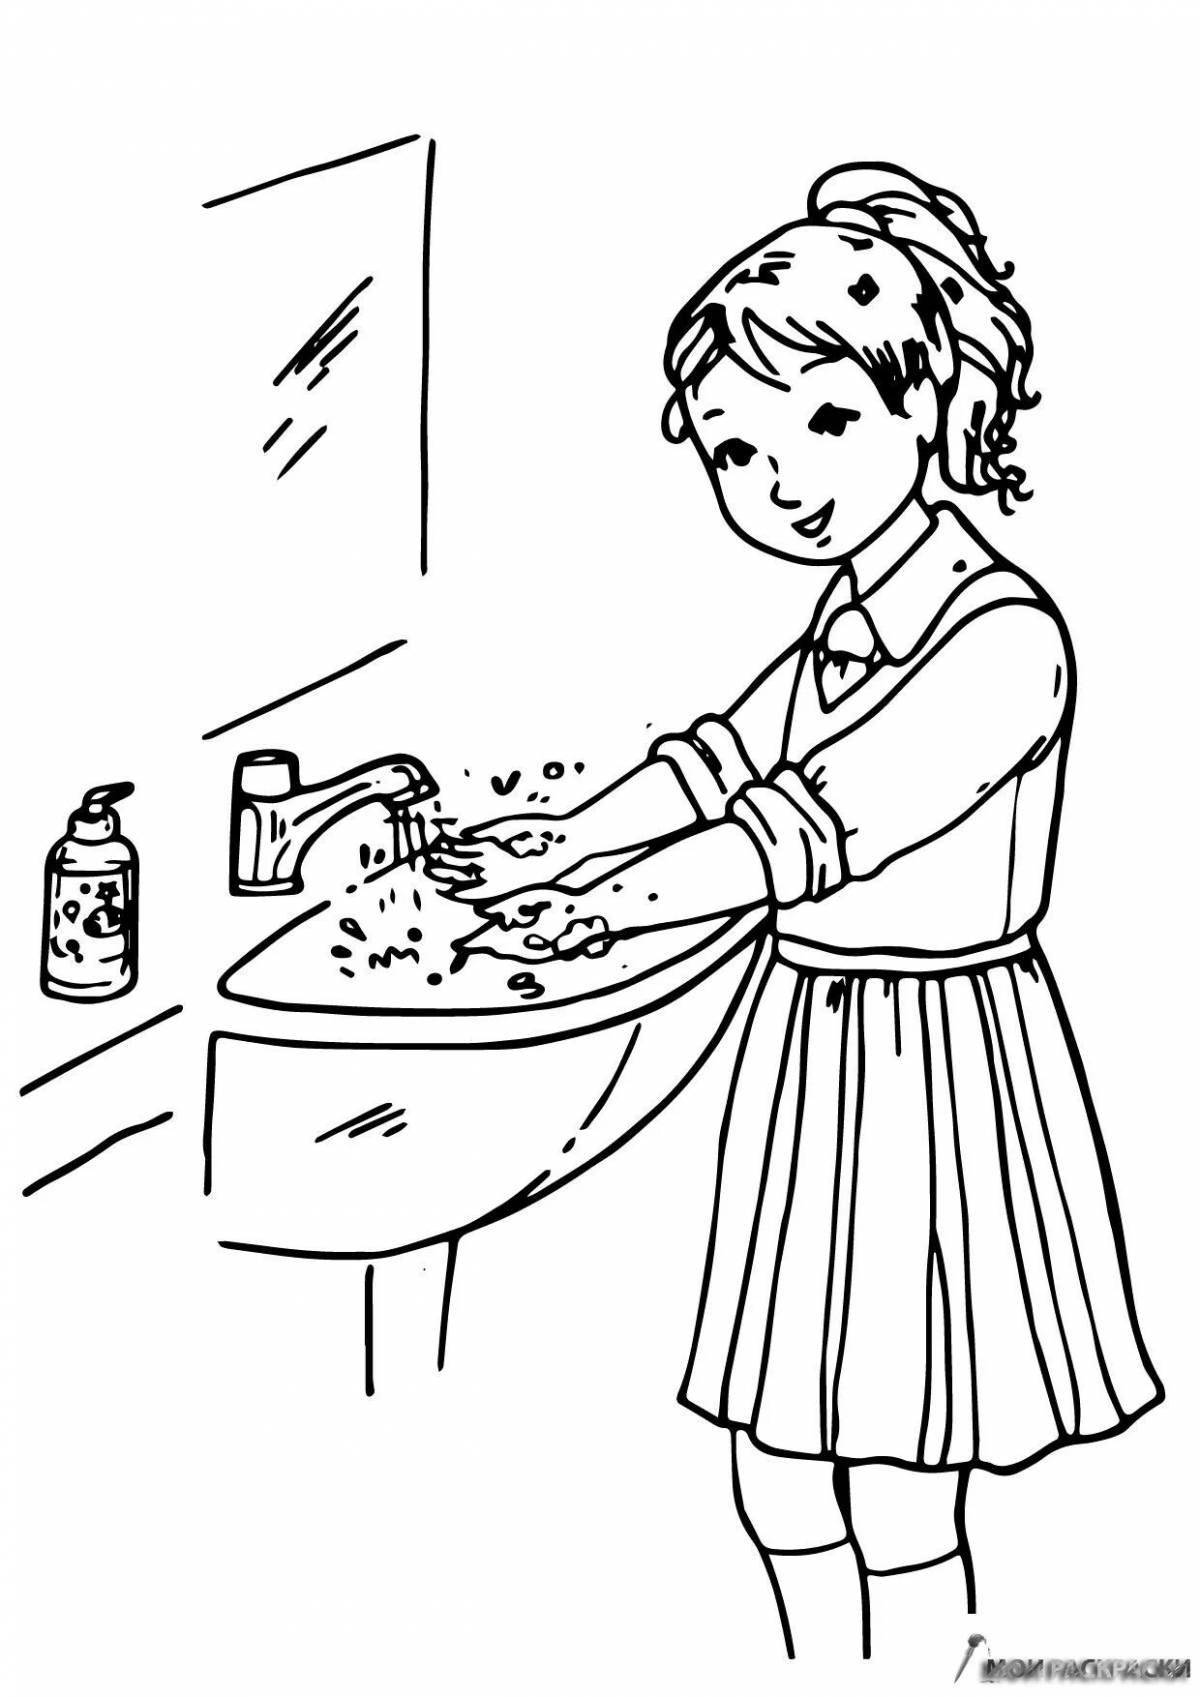 Happy hand washing coloring book